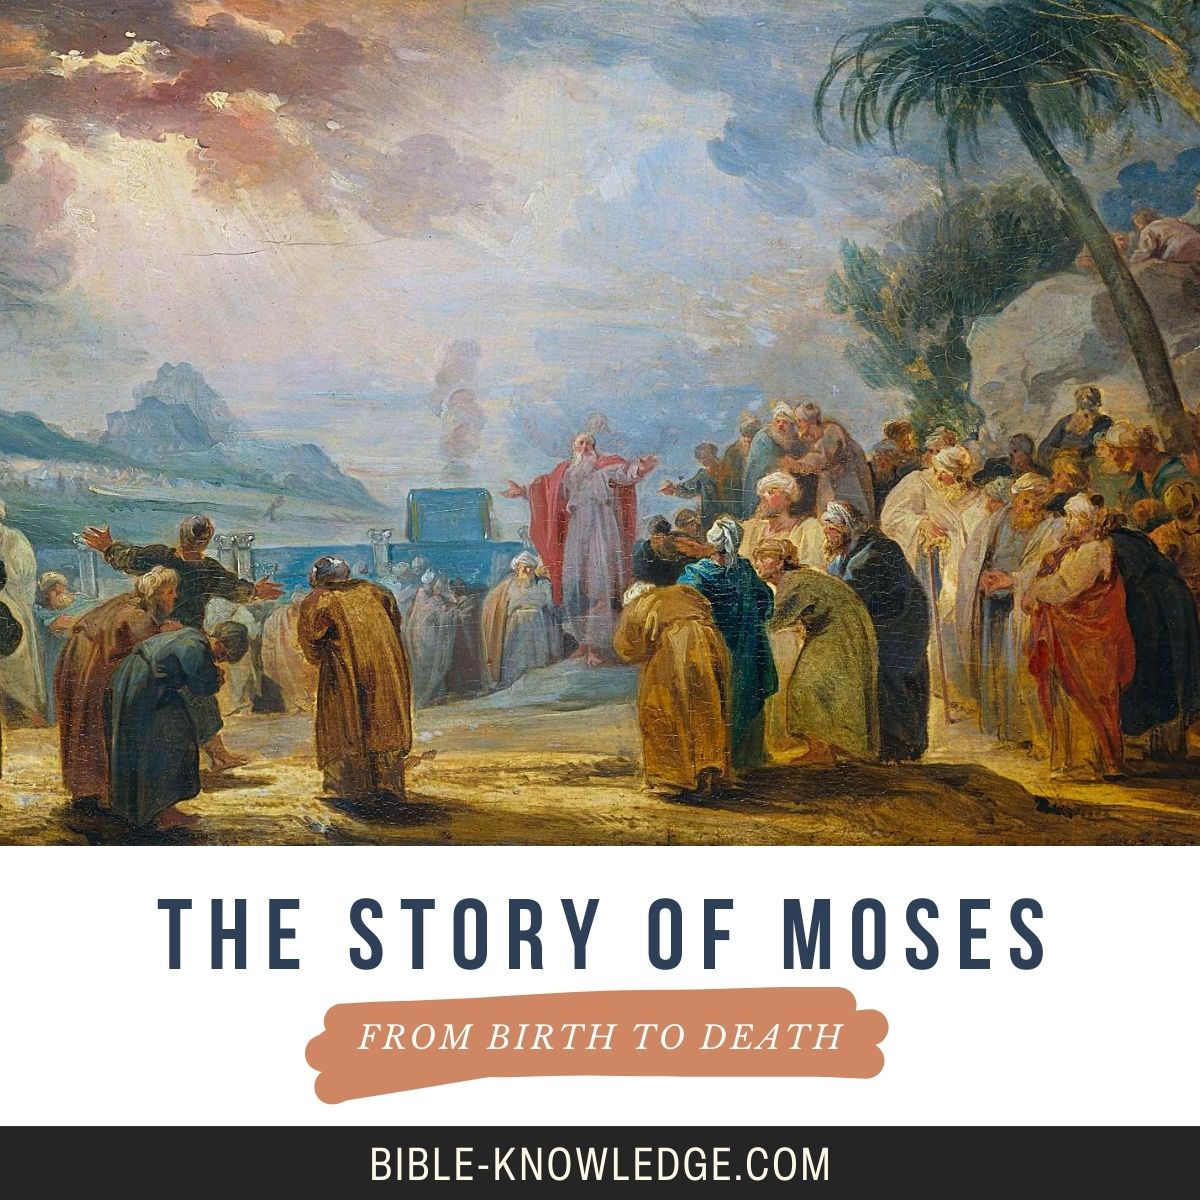 The Story of Moses